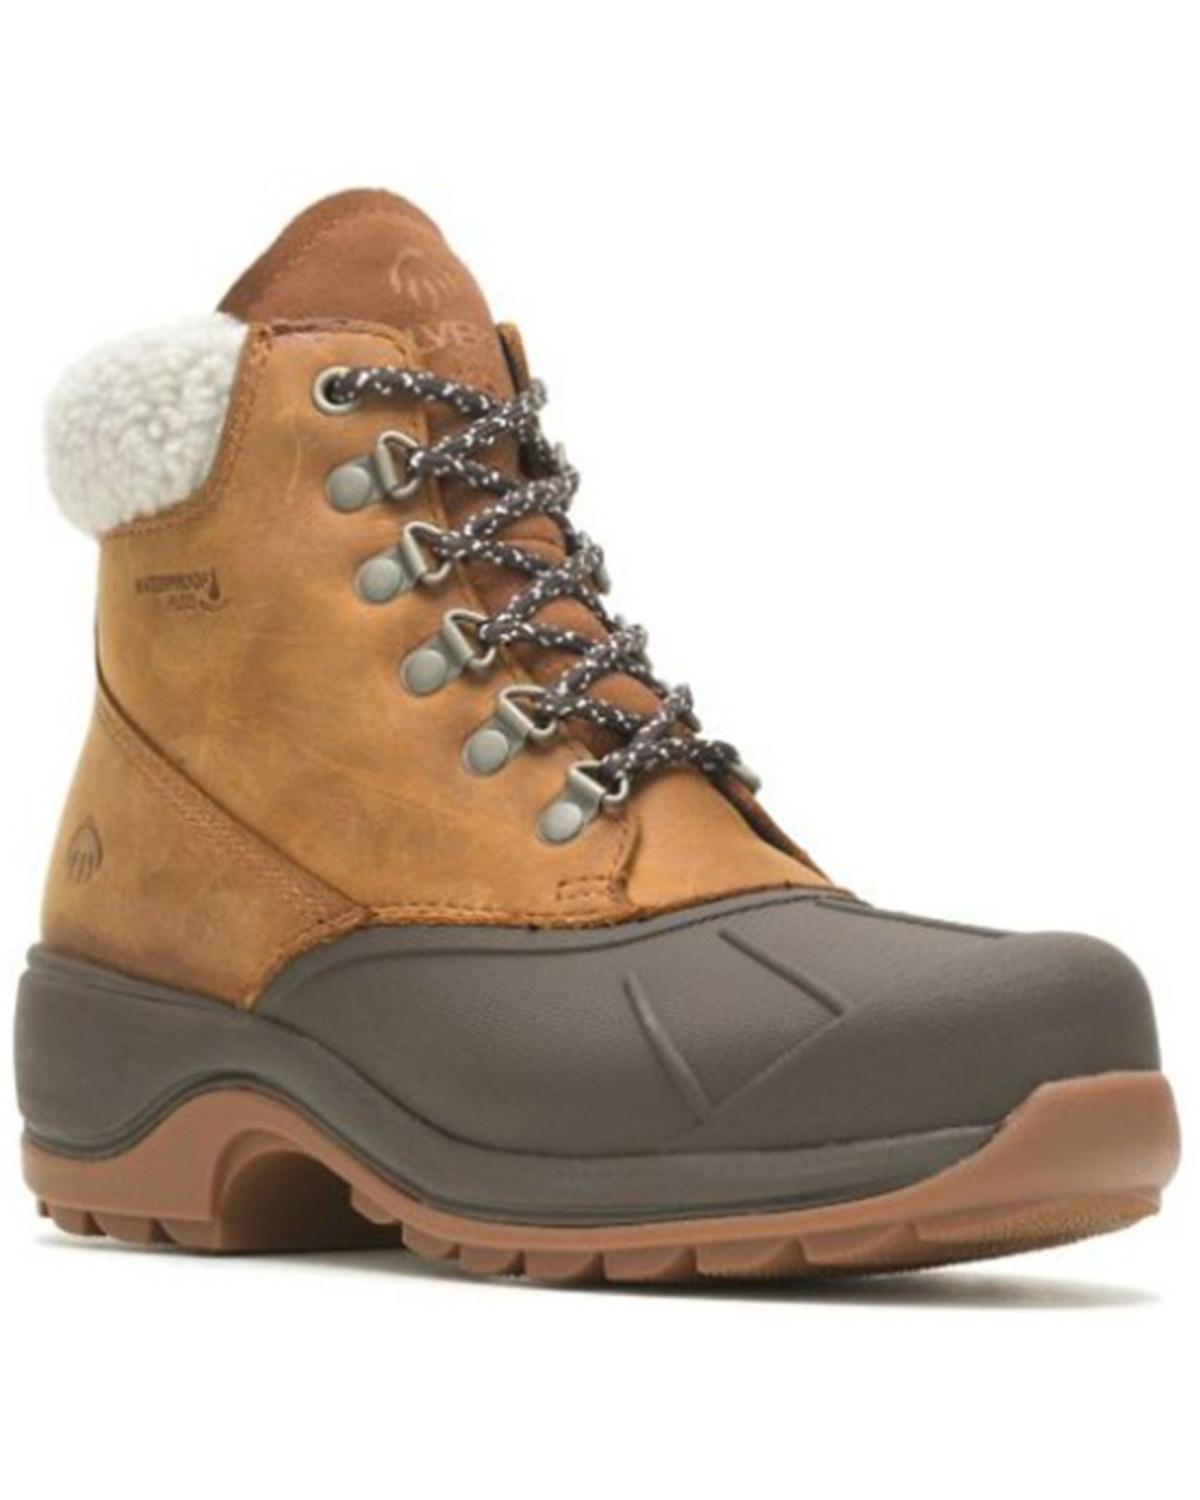 Wolverine Women's Frost Insulated Waterproof Work Boots - Round Toe